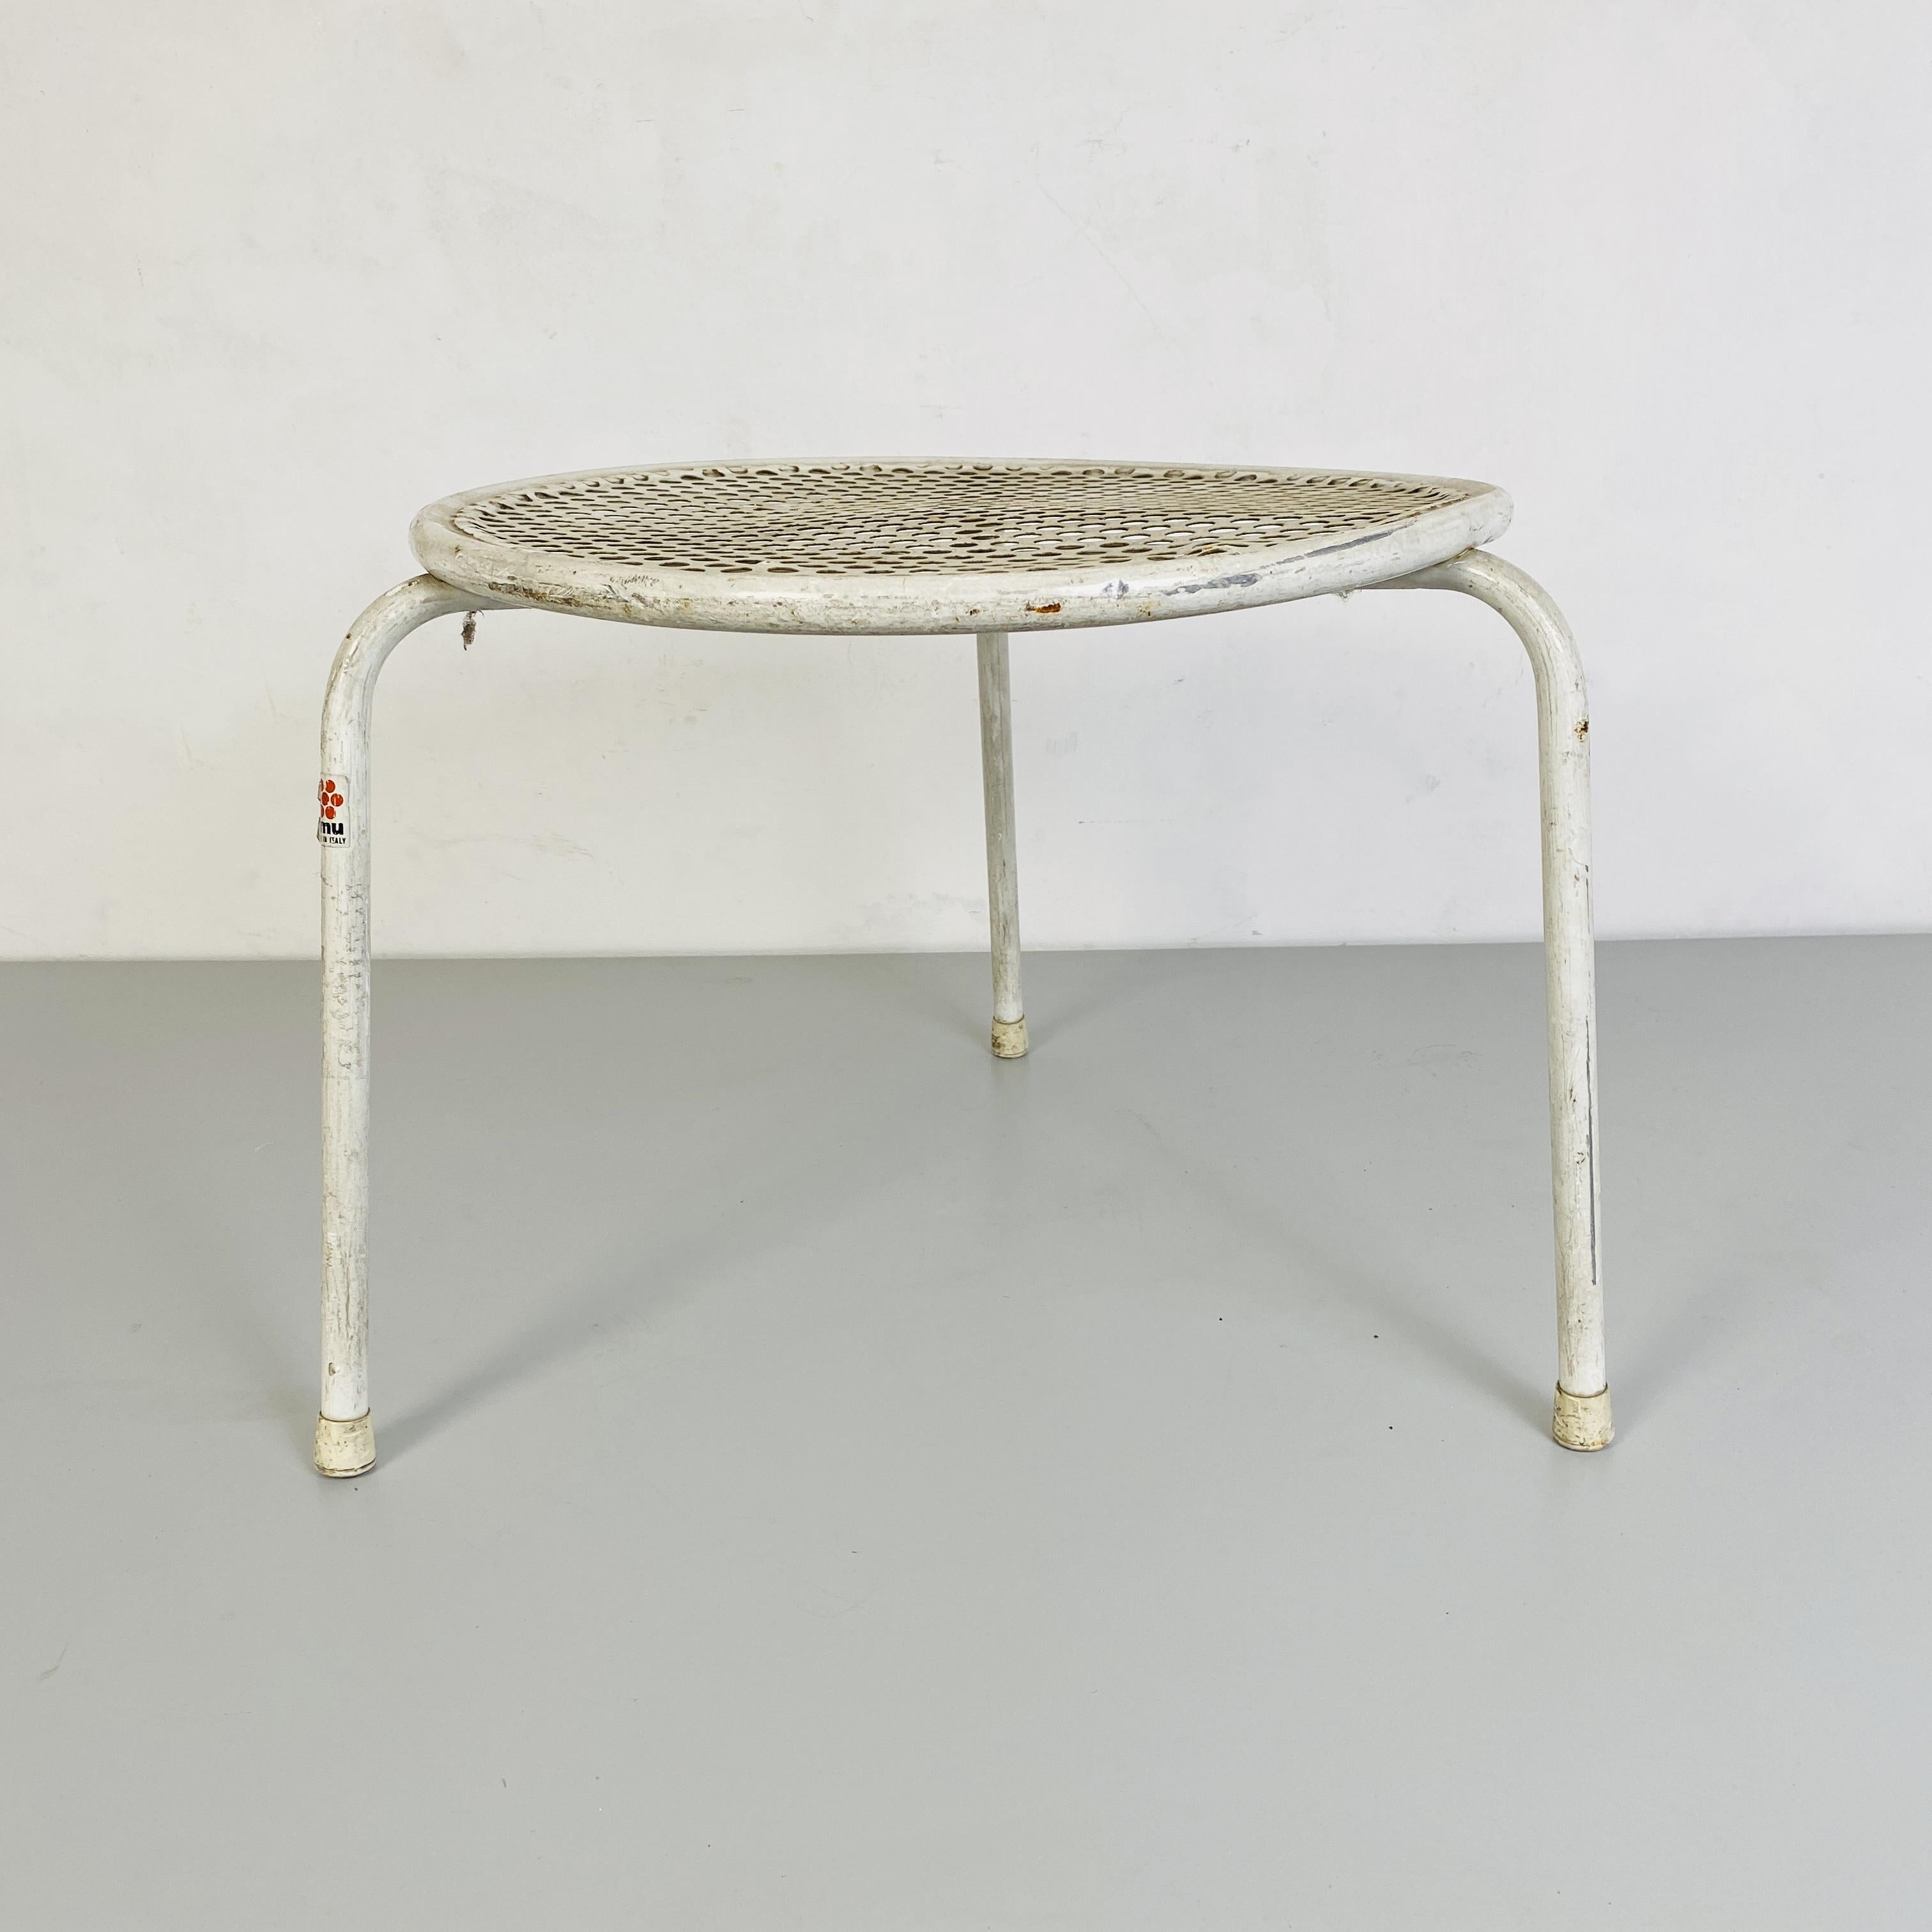 Perforated metal outdoor table by Emu, 1960s
Outdoor table in perforated metal painted in white. Made in the 1960s by Emu.

Fair conditions, in patina.

Measurements in cm 46x34h.